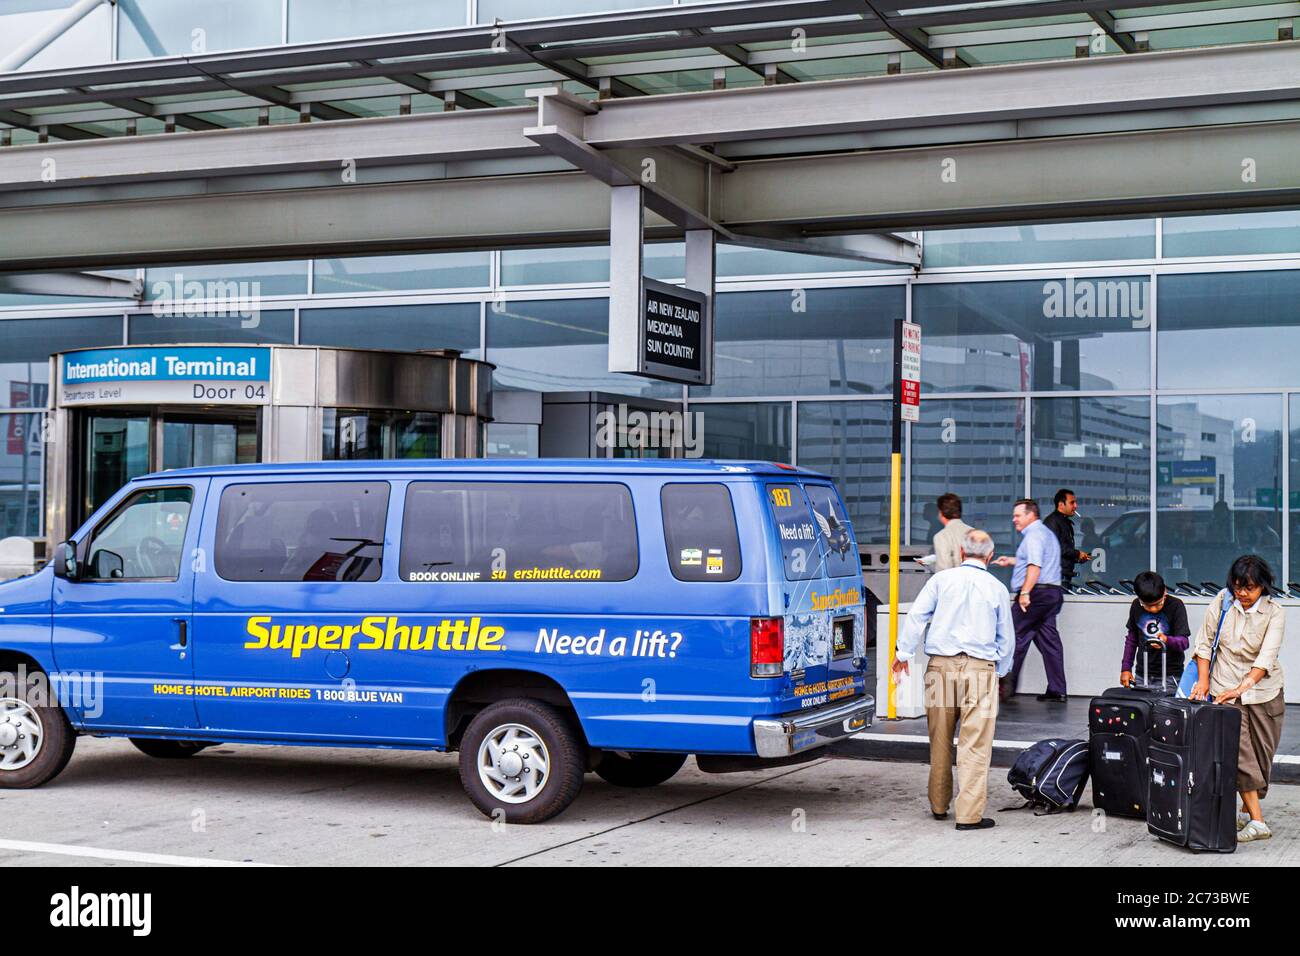 Airport Shuttle Van High Resolution Stock Photography and Images - Alamy